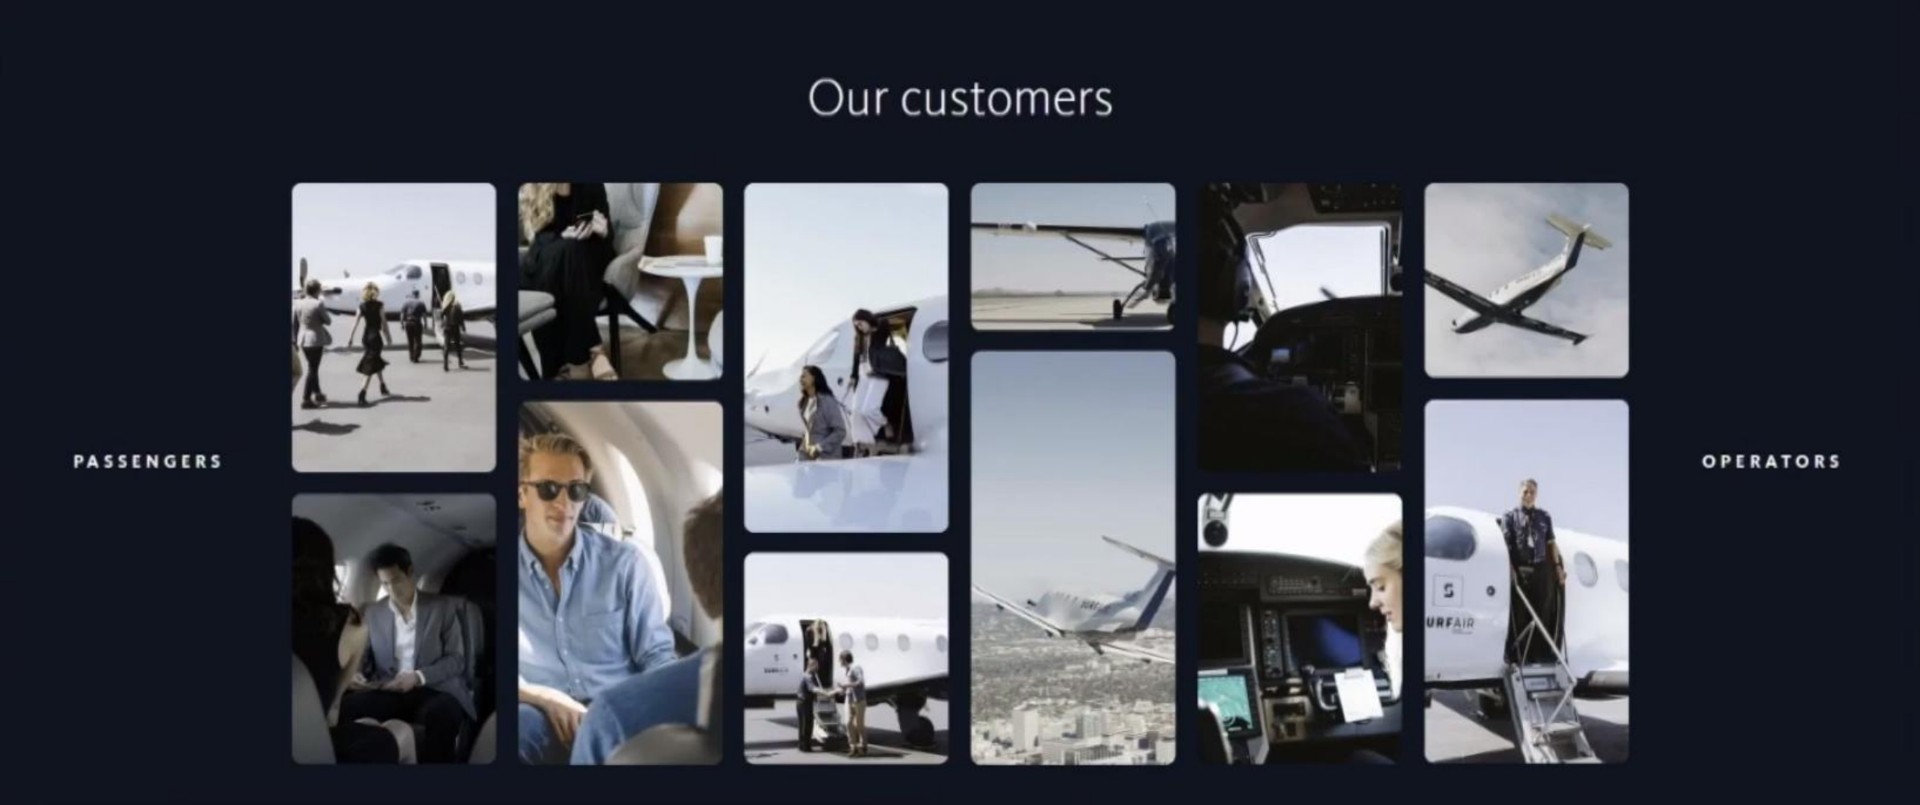 our customers operators passengers | Surf Air